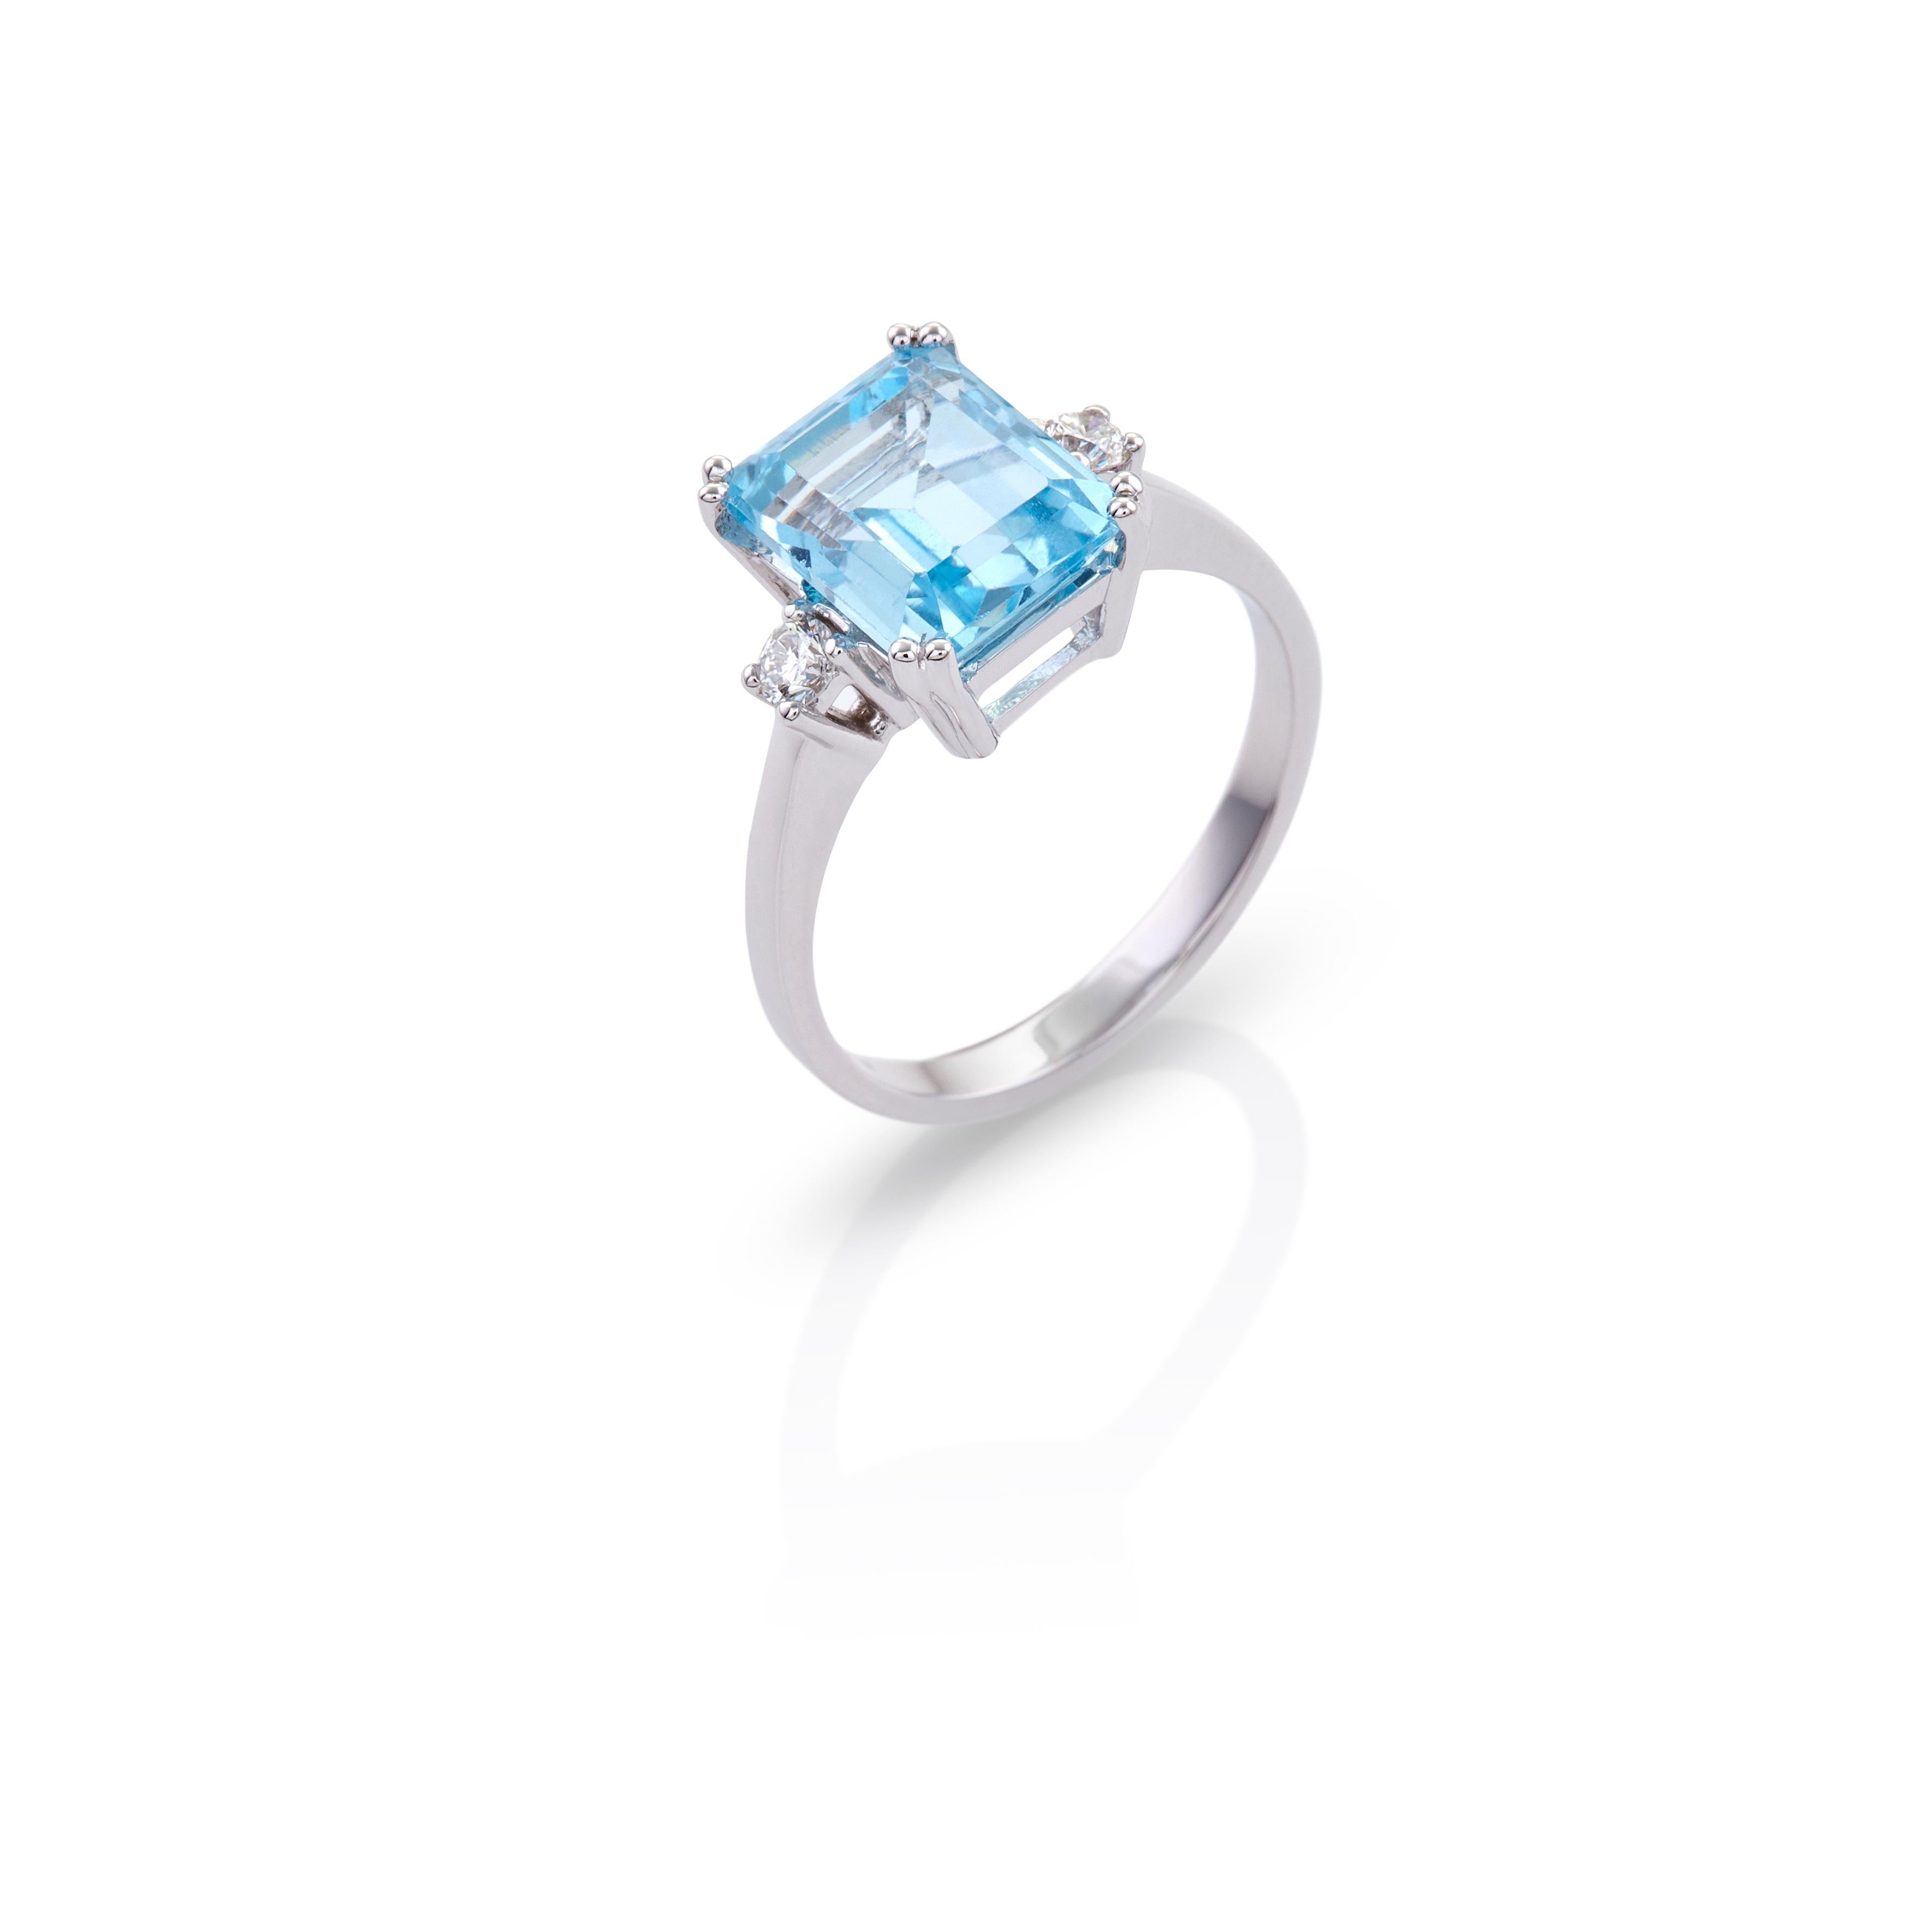 For Sale:  Double Prong Ring in 18Kt White Gold with Emerald Cut Blue Topaz and Diamonds 3